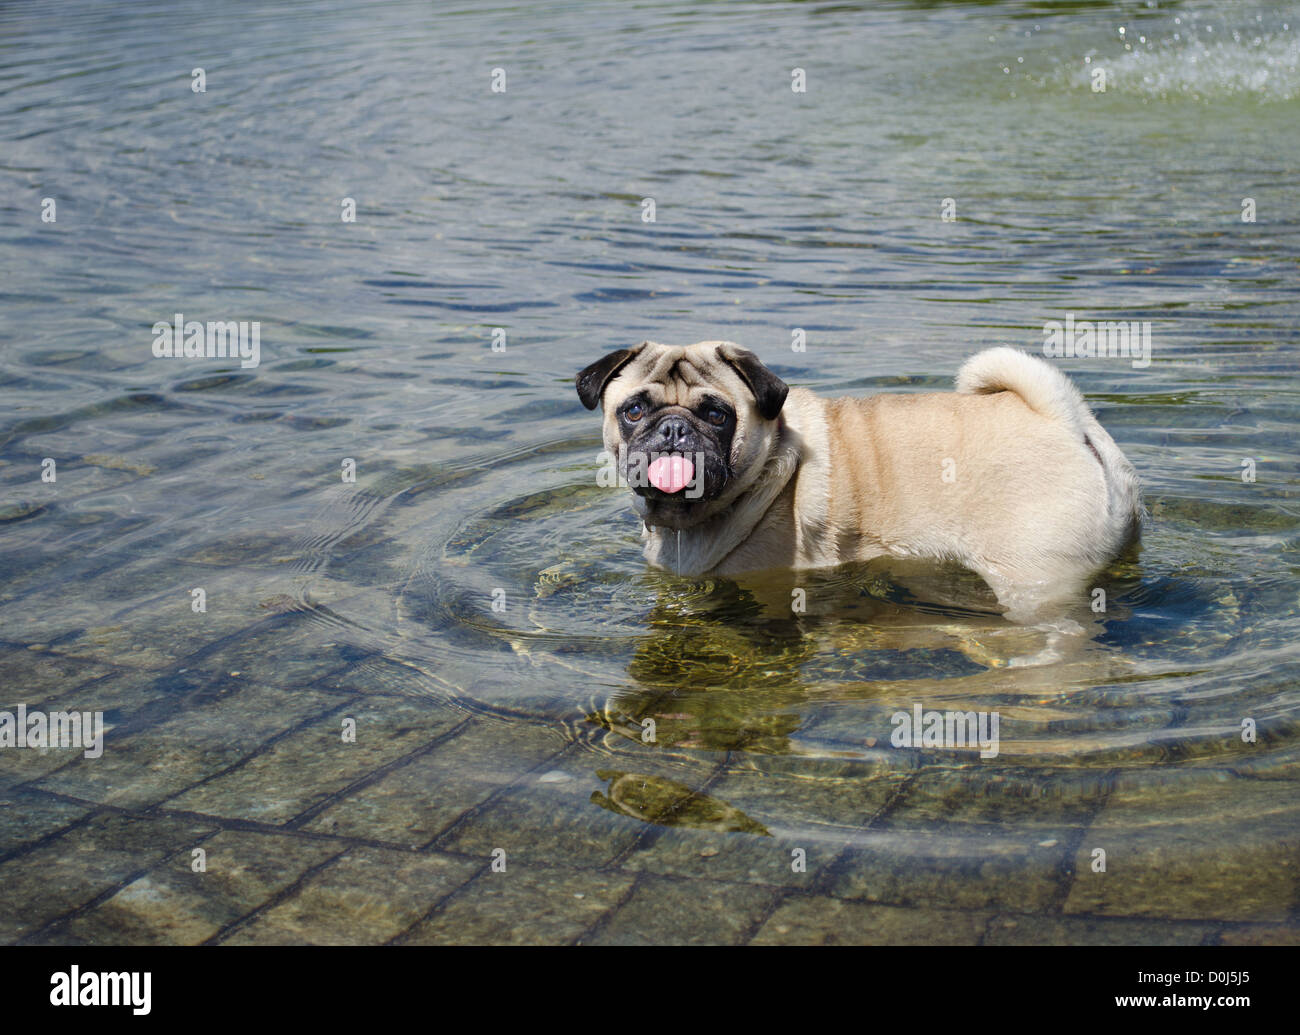 Pug dog wet and happy playing in a fountain, pond or pool Stock Photo